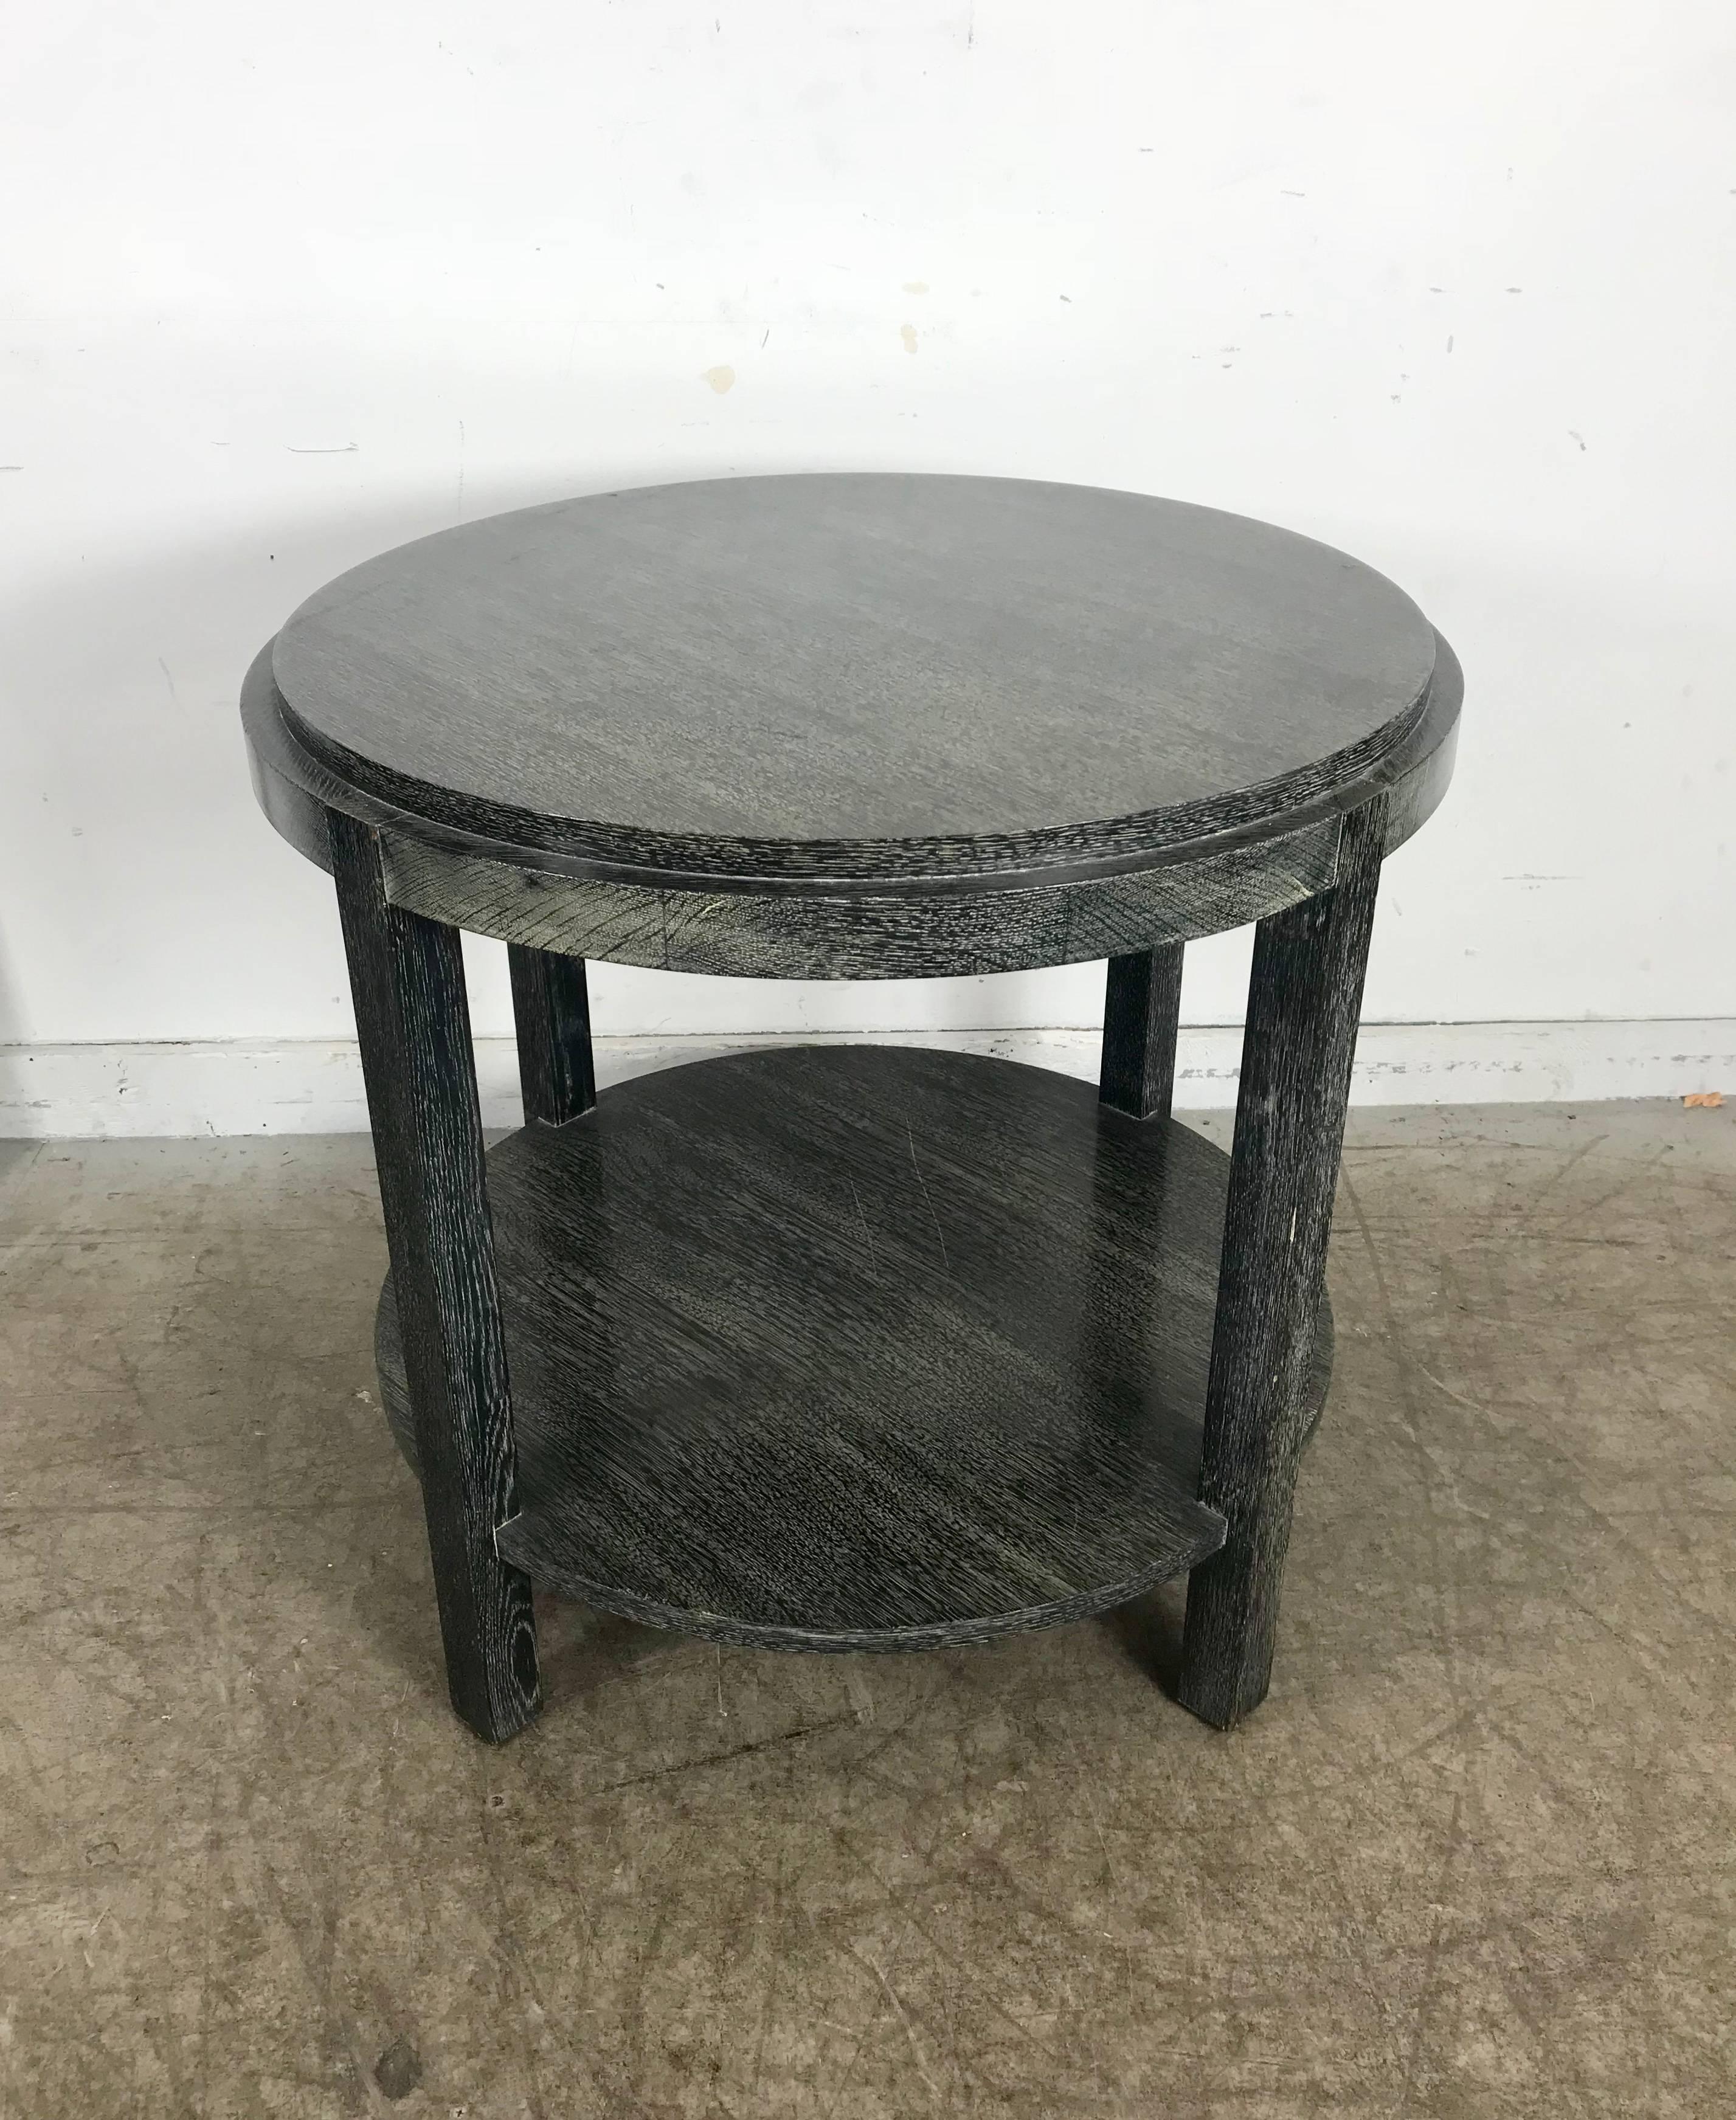 Stunning ebonized cerused oak center or lamp table attributed to James Mont, classic modernist styling, wonderful original finish and condition.